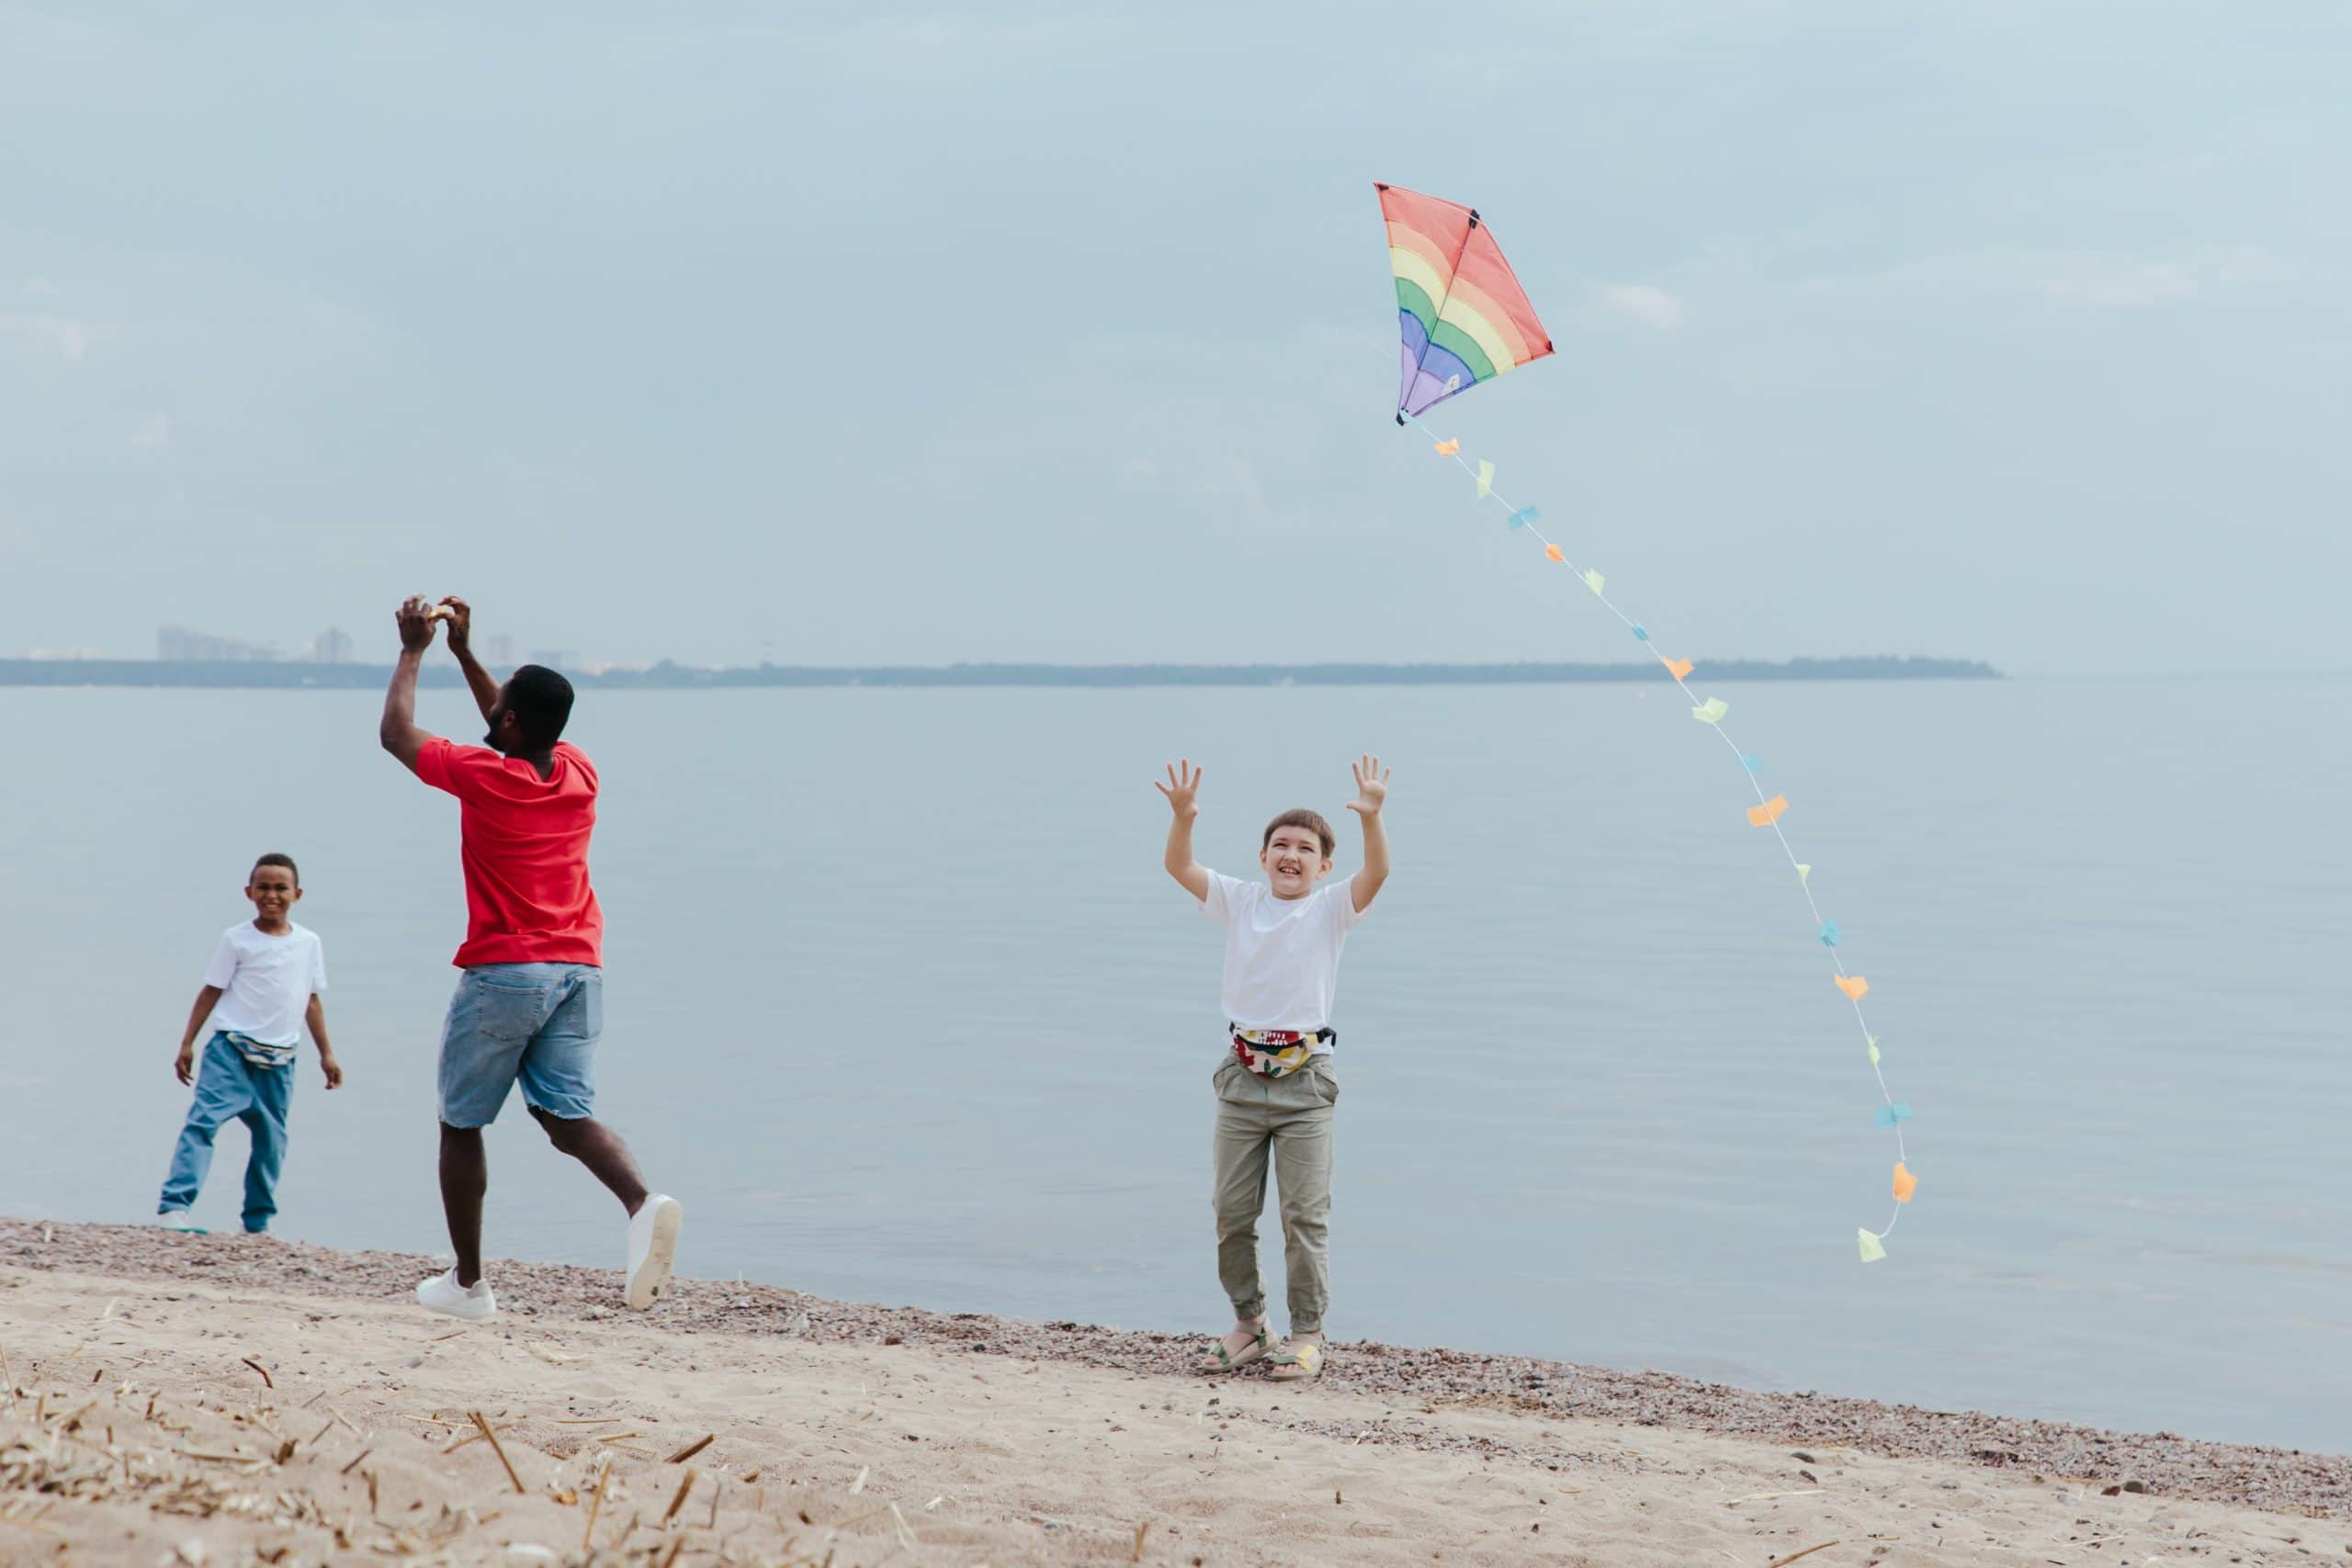 children play with a kite